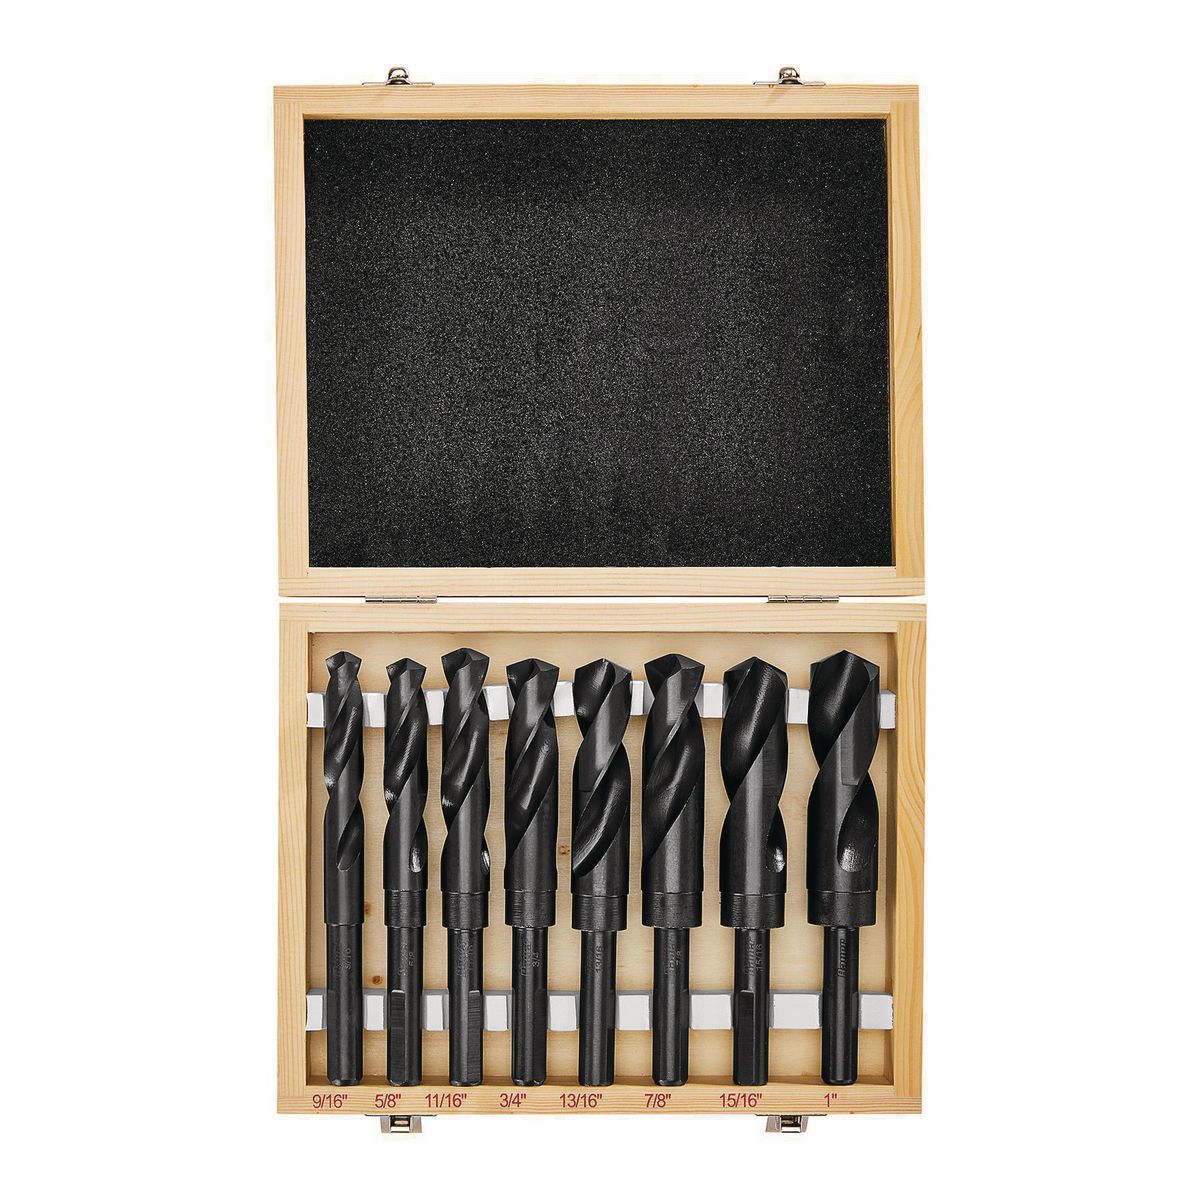 Black Oxide Silver and Deming Drill Bit Set, 8-Piece